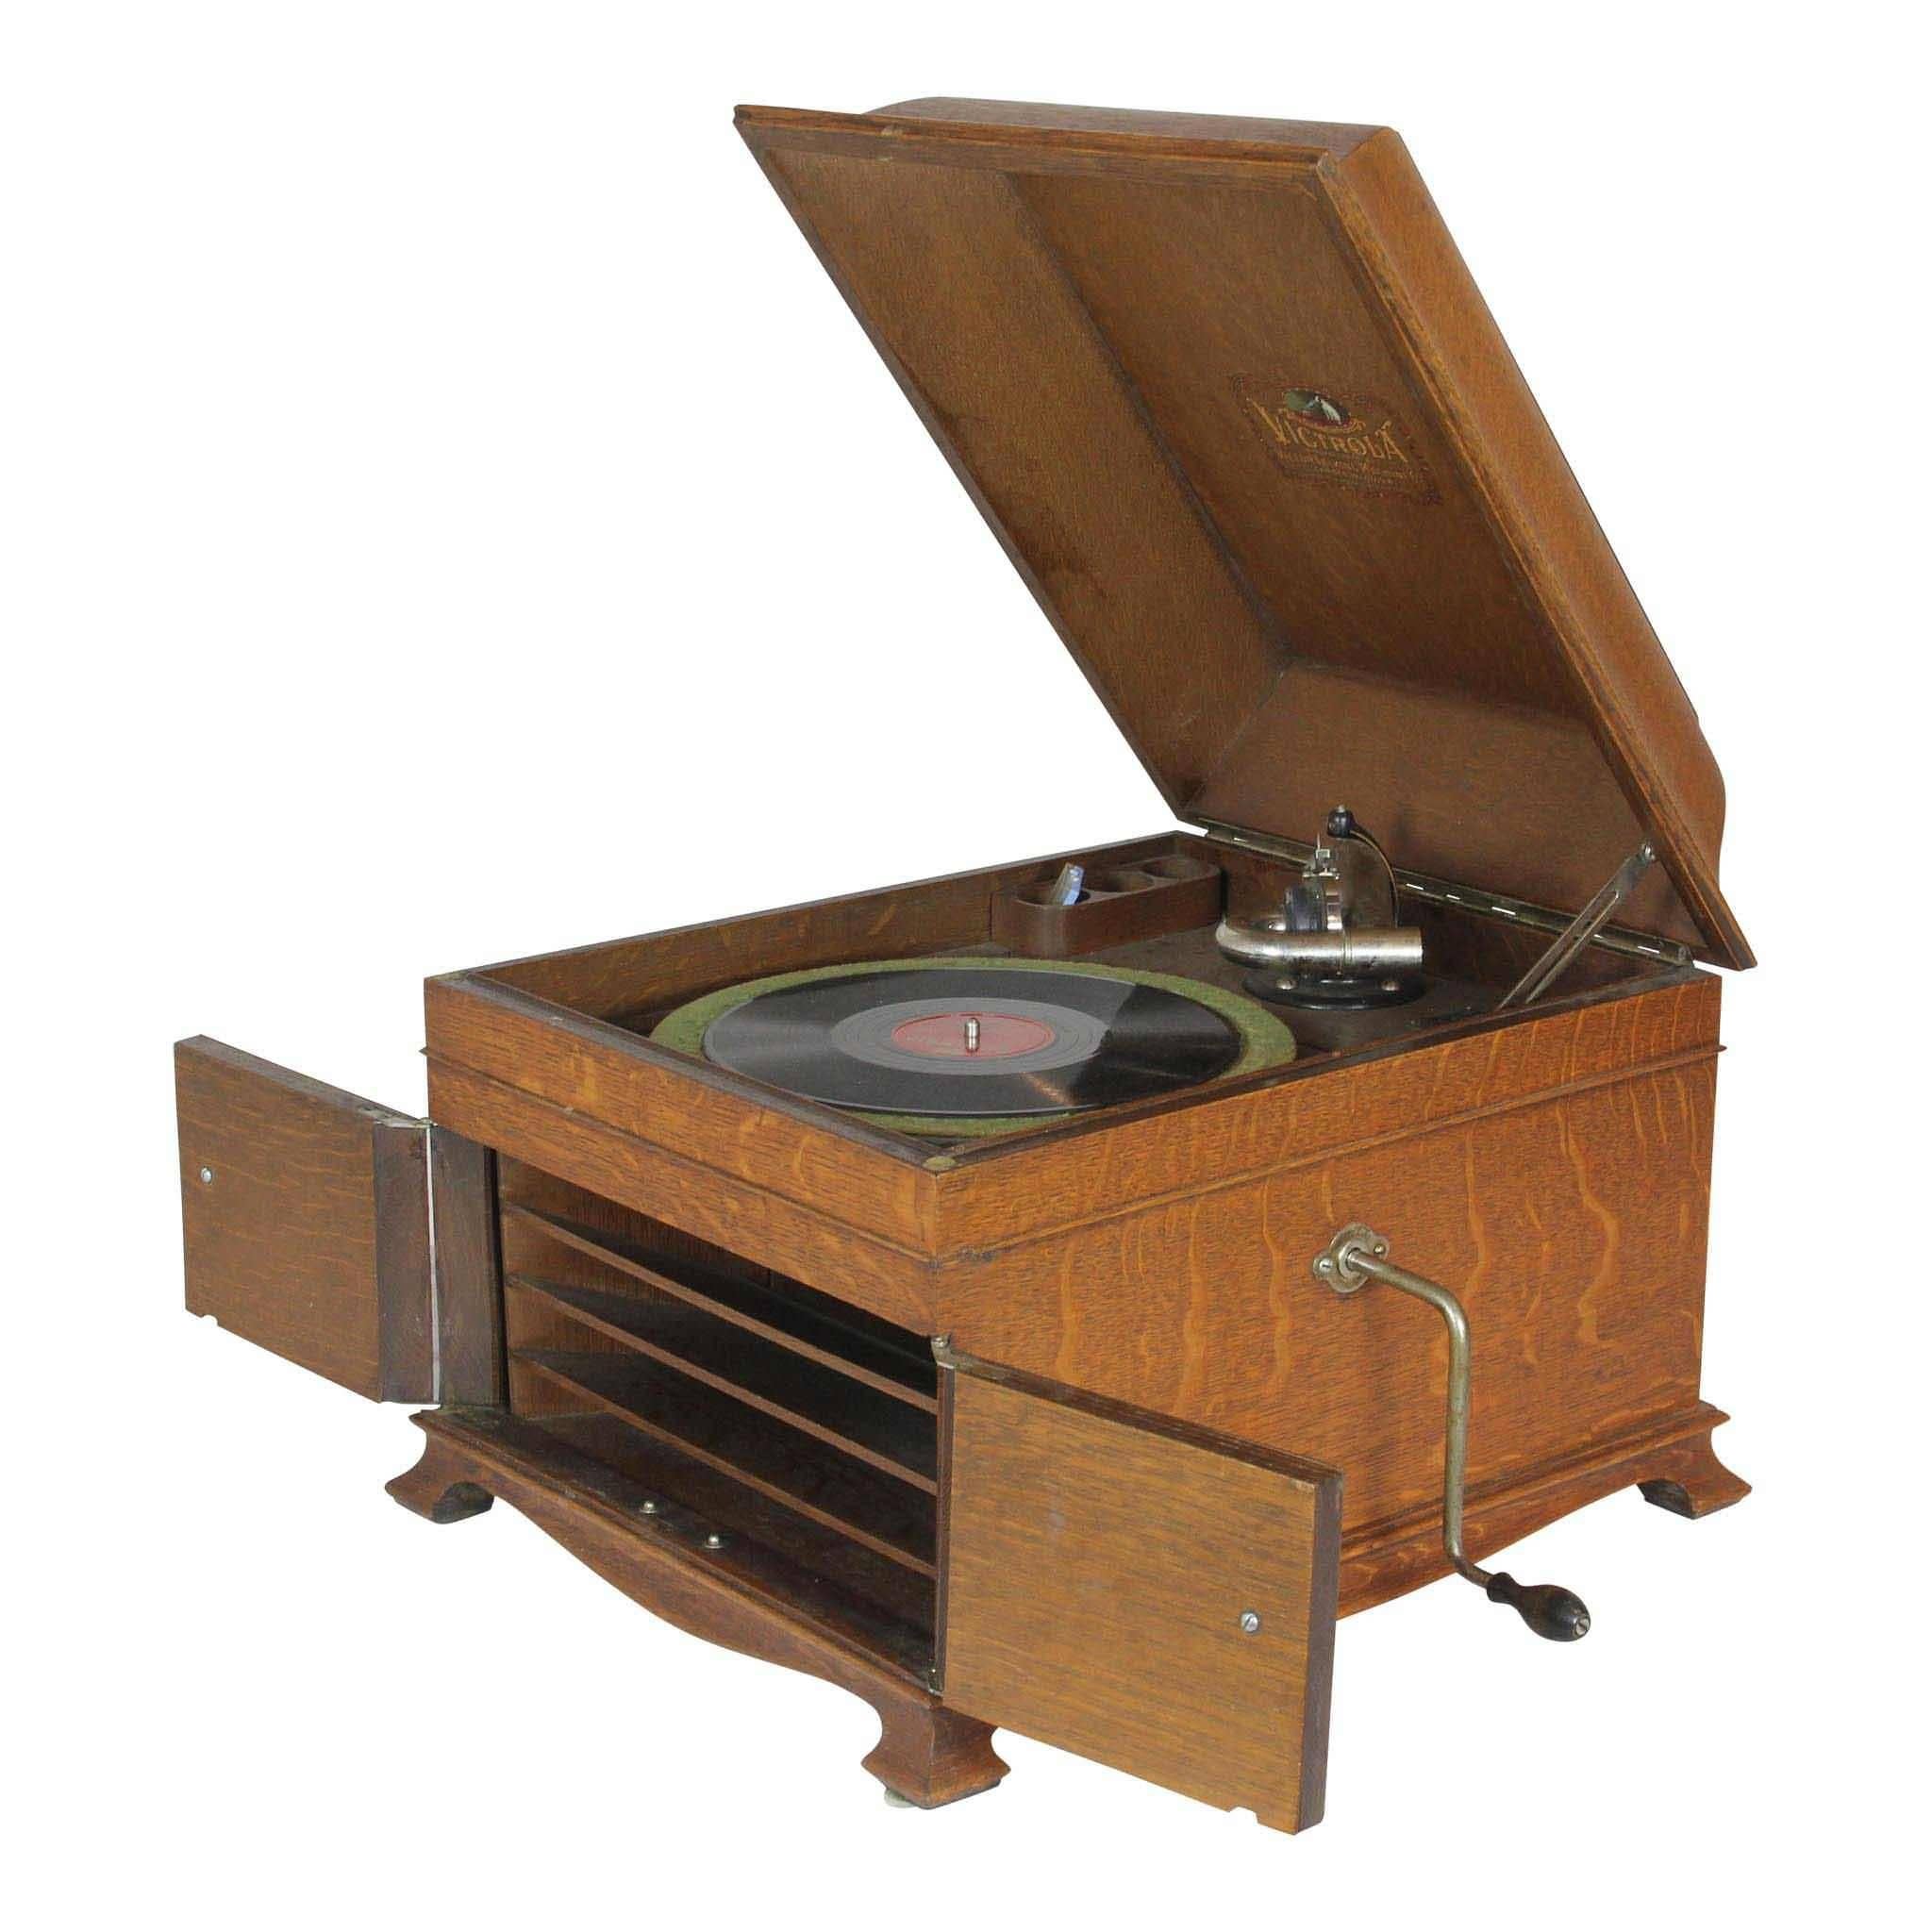 This Victor Victrola talking machine is in excellent working condition with a beautiful untouched original finish on the case. Serial number 188101G tells us this player was manufactured in the middle part of 1915, and is one of the first models to